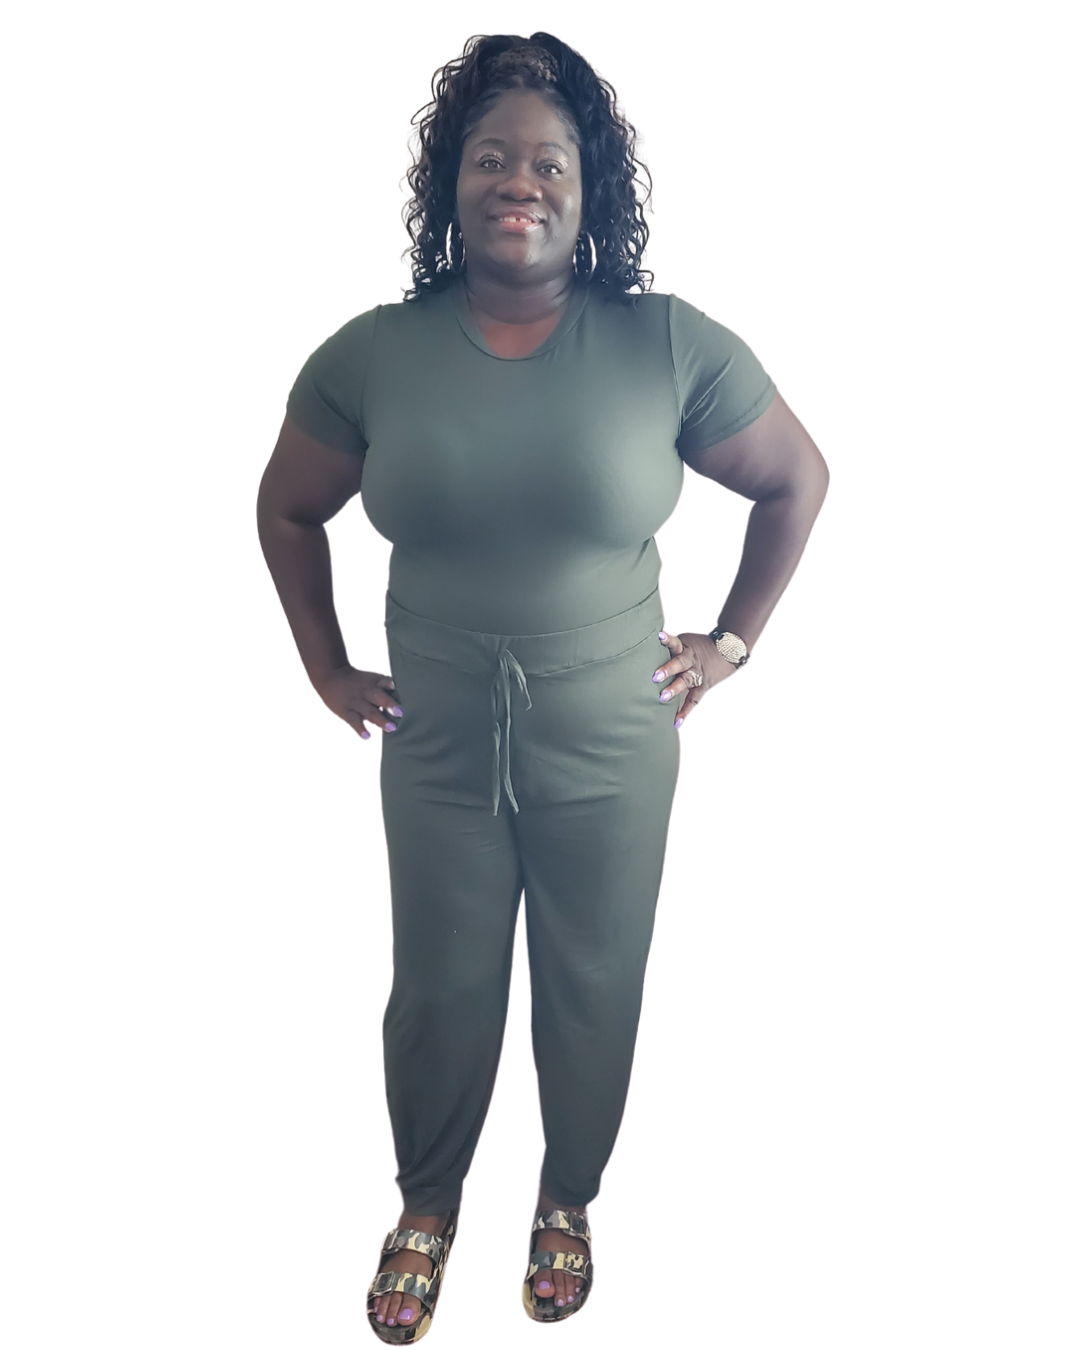 fan favorite. small-large olive green soft material 2 pc short sleeve shirt and loose-fitting pains with a stretch. has a jogger look at the bottom of the pants